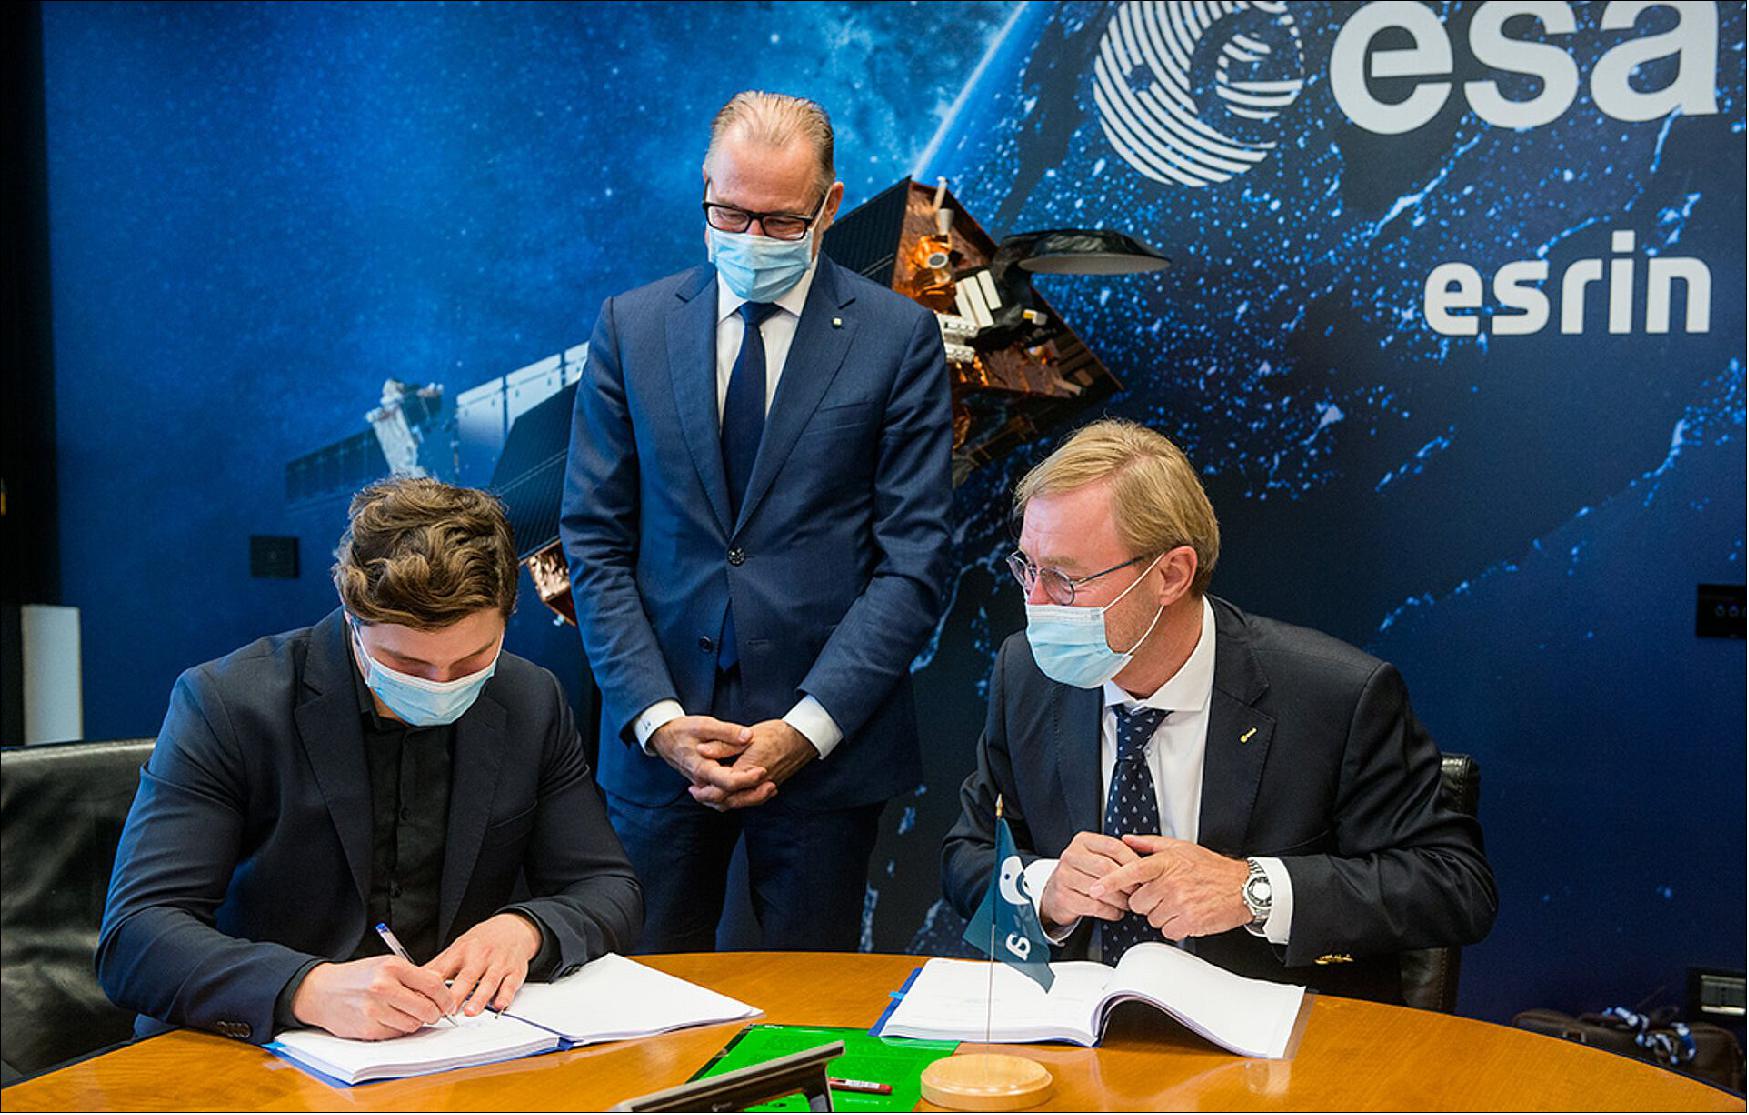 Figure 23: Signing up ICEYE to Copernicus. ESA has signed a contract that brings the ICEYE constellation of small satellites into the fleet of missions contributing to Europe’s Copernicus environmental monitoring program. As a commercial provider of satellite radar imagery, ICEYE is a perfect example of European New Space being implemented within Copernicus. The contract was signed by ESA’s Acting Director of Earth Observation Programs, Toni Tolker-Nielsen (right) and CEO of ICEYE, Rafal Modrzewski (left), in the presence of ESA’s Director General, Josef Aschbacher (image credit: ESA, V. Stefanelli)